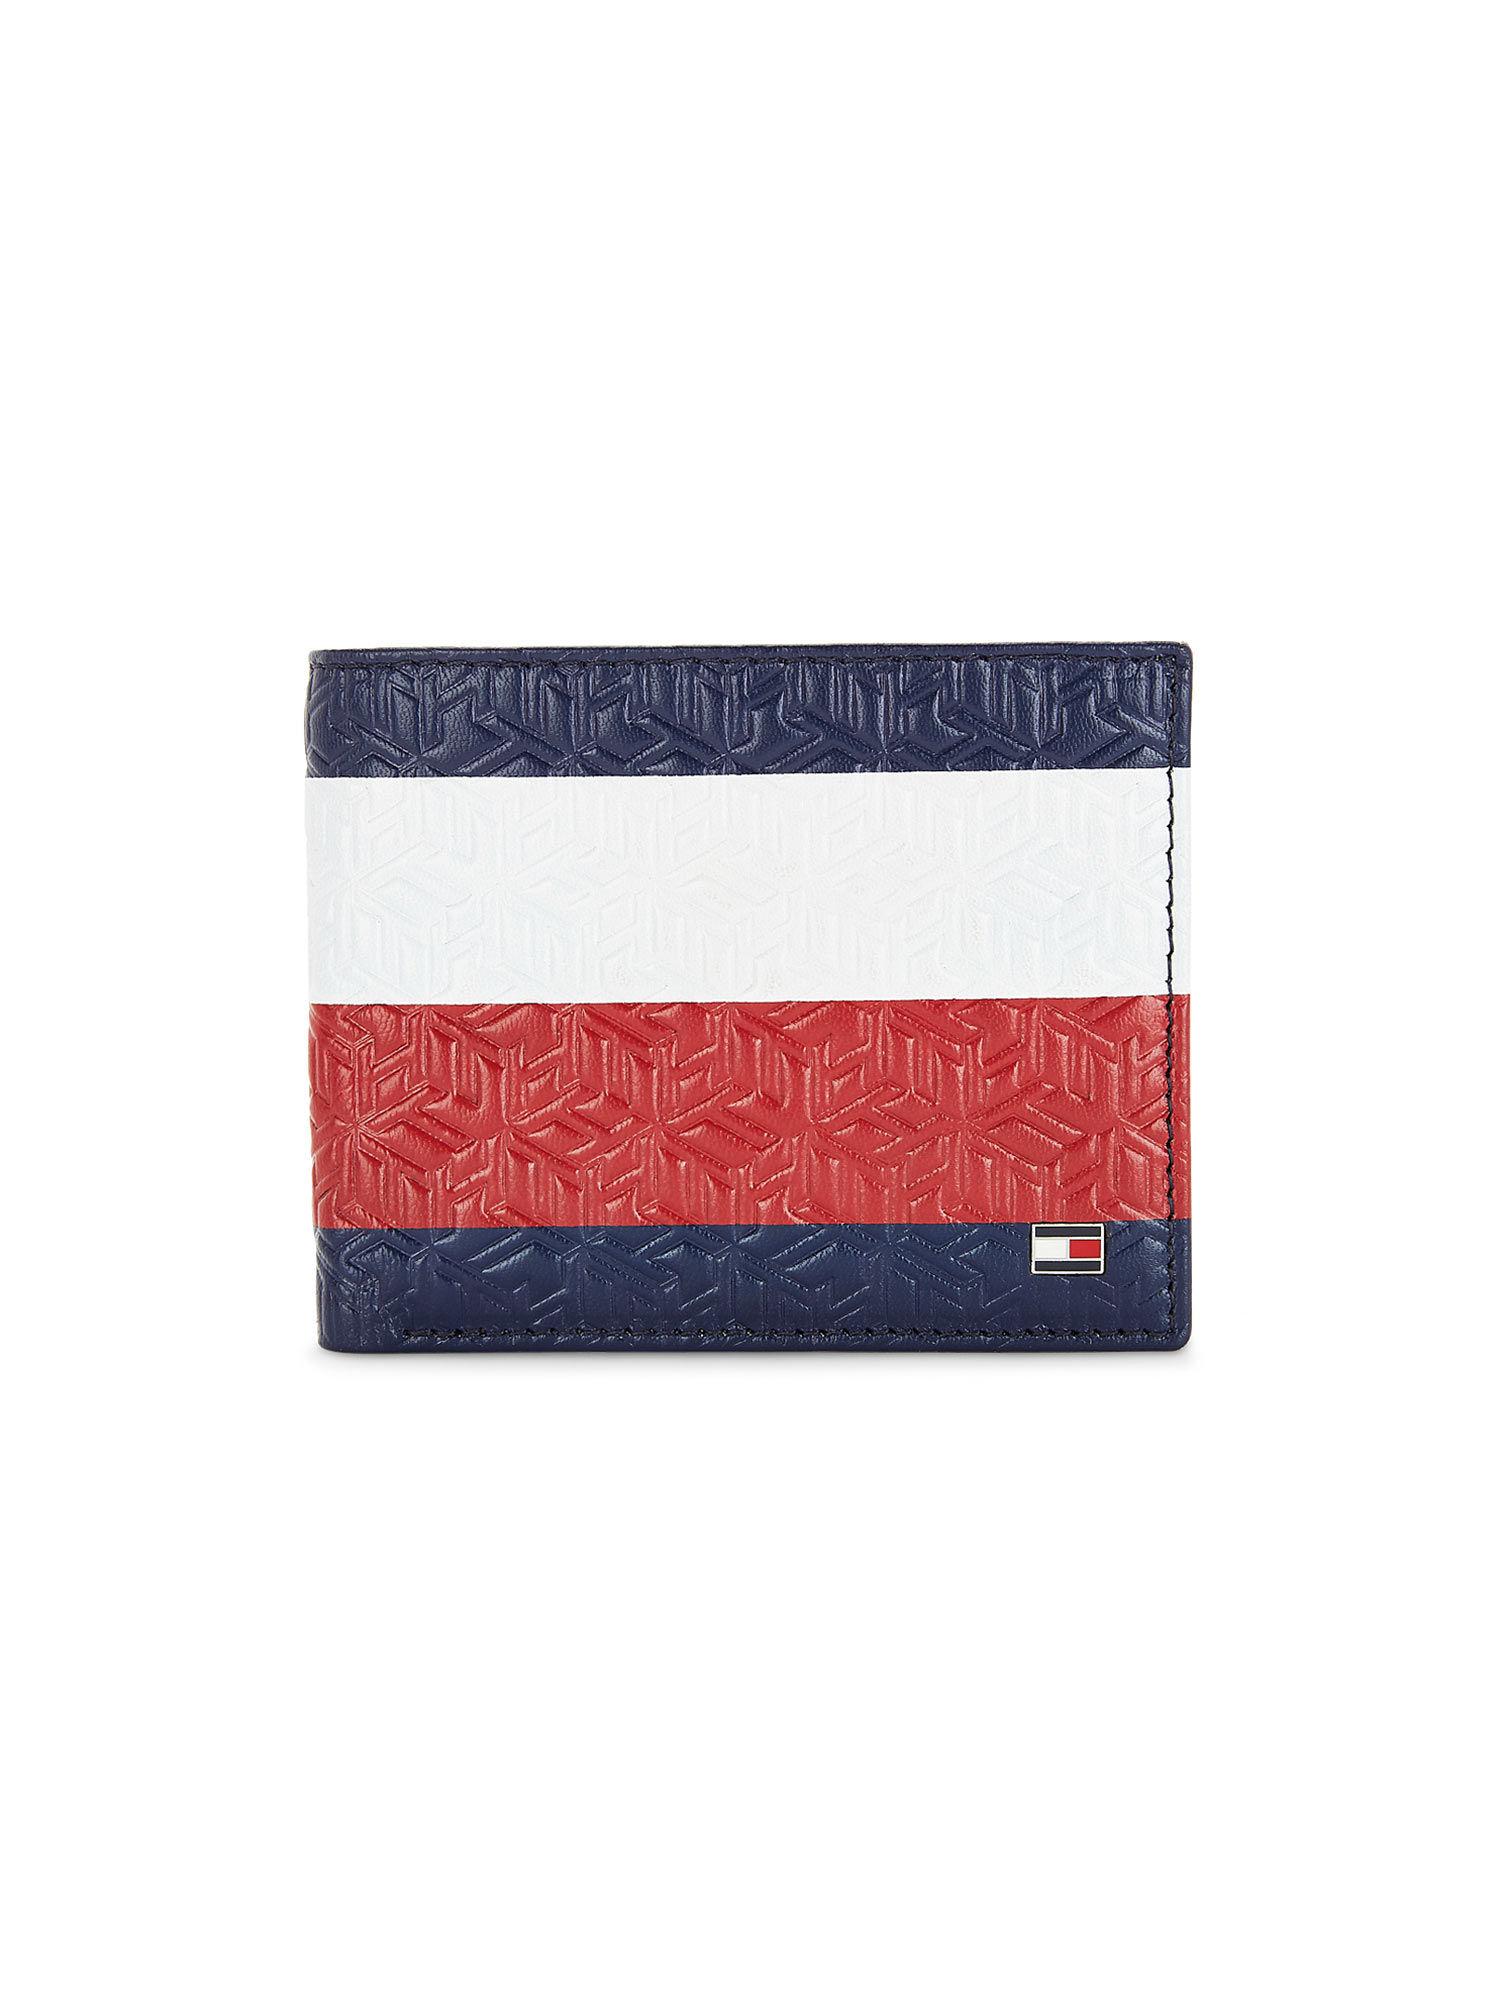 stellar mens leather global coin wallet red & white & blue